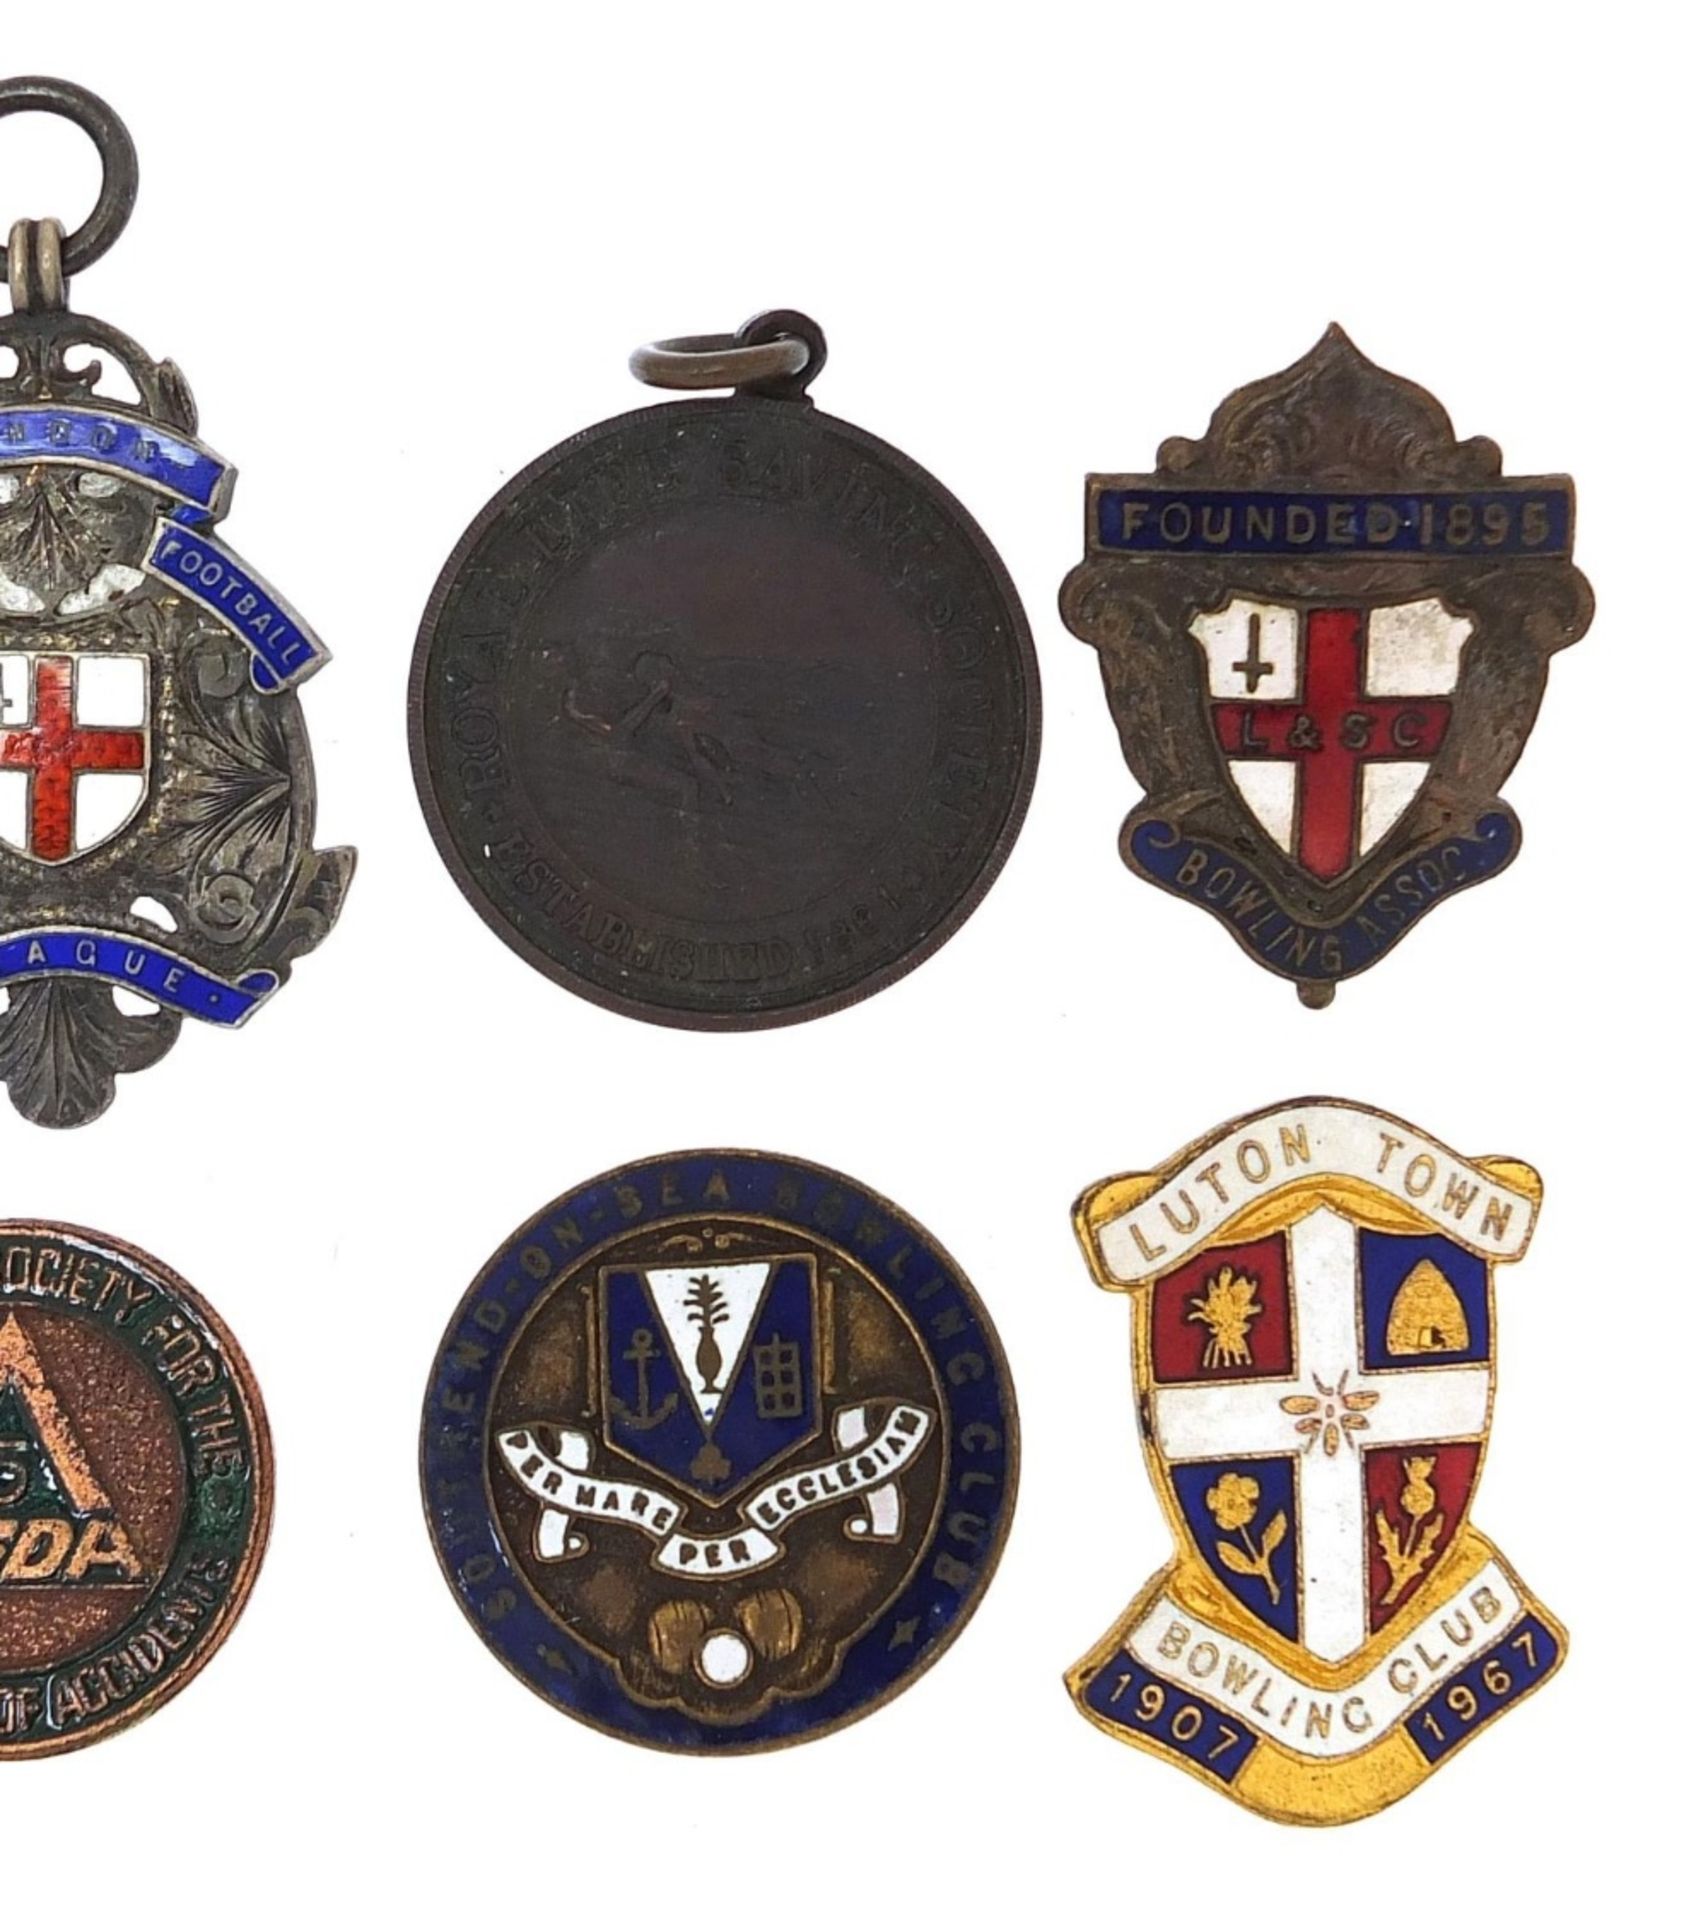 Badges and medallions including an Elkington silver medallion and a silver and enamel London - Bild 3 aus 7